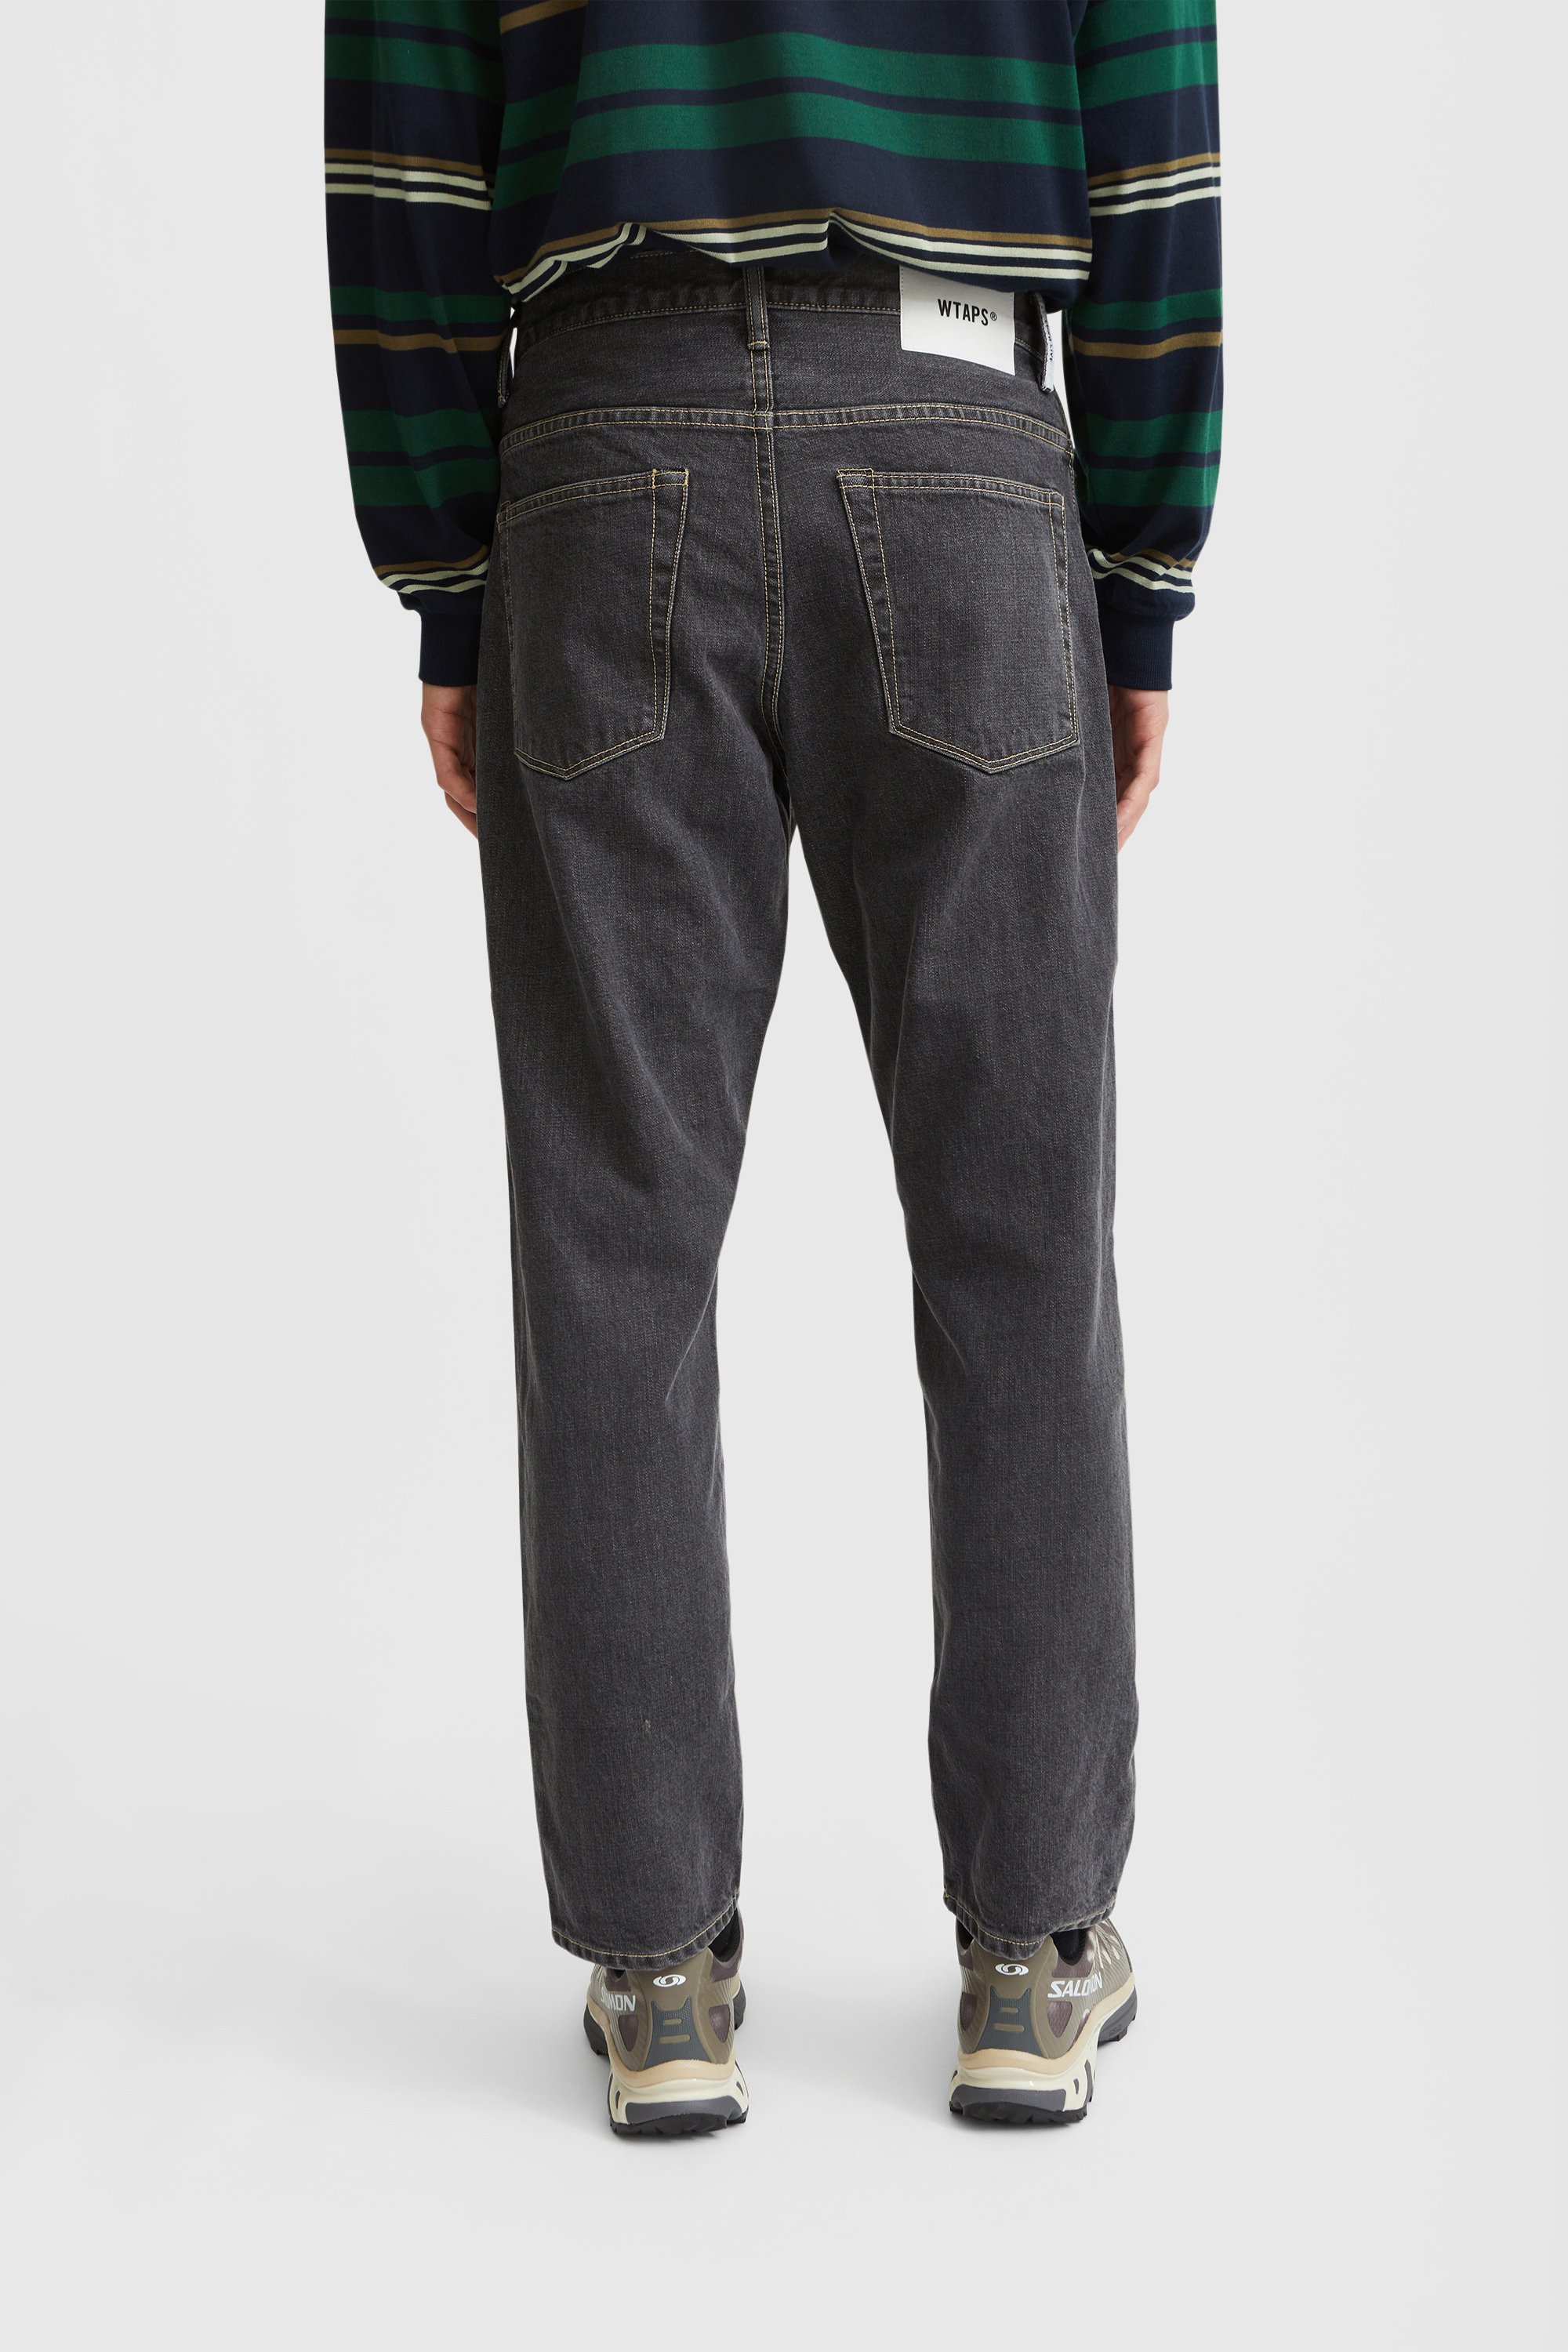 wtaps 21aw Blues baggy trousers | kensysgas.com